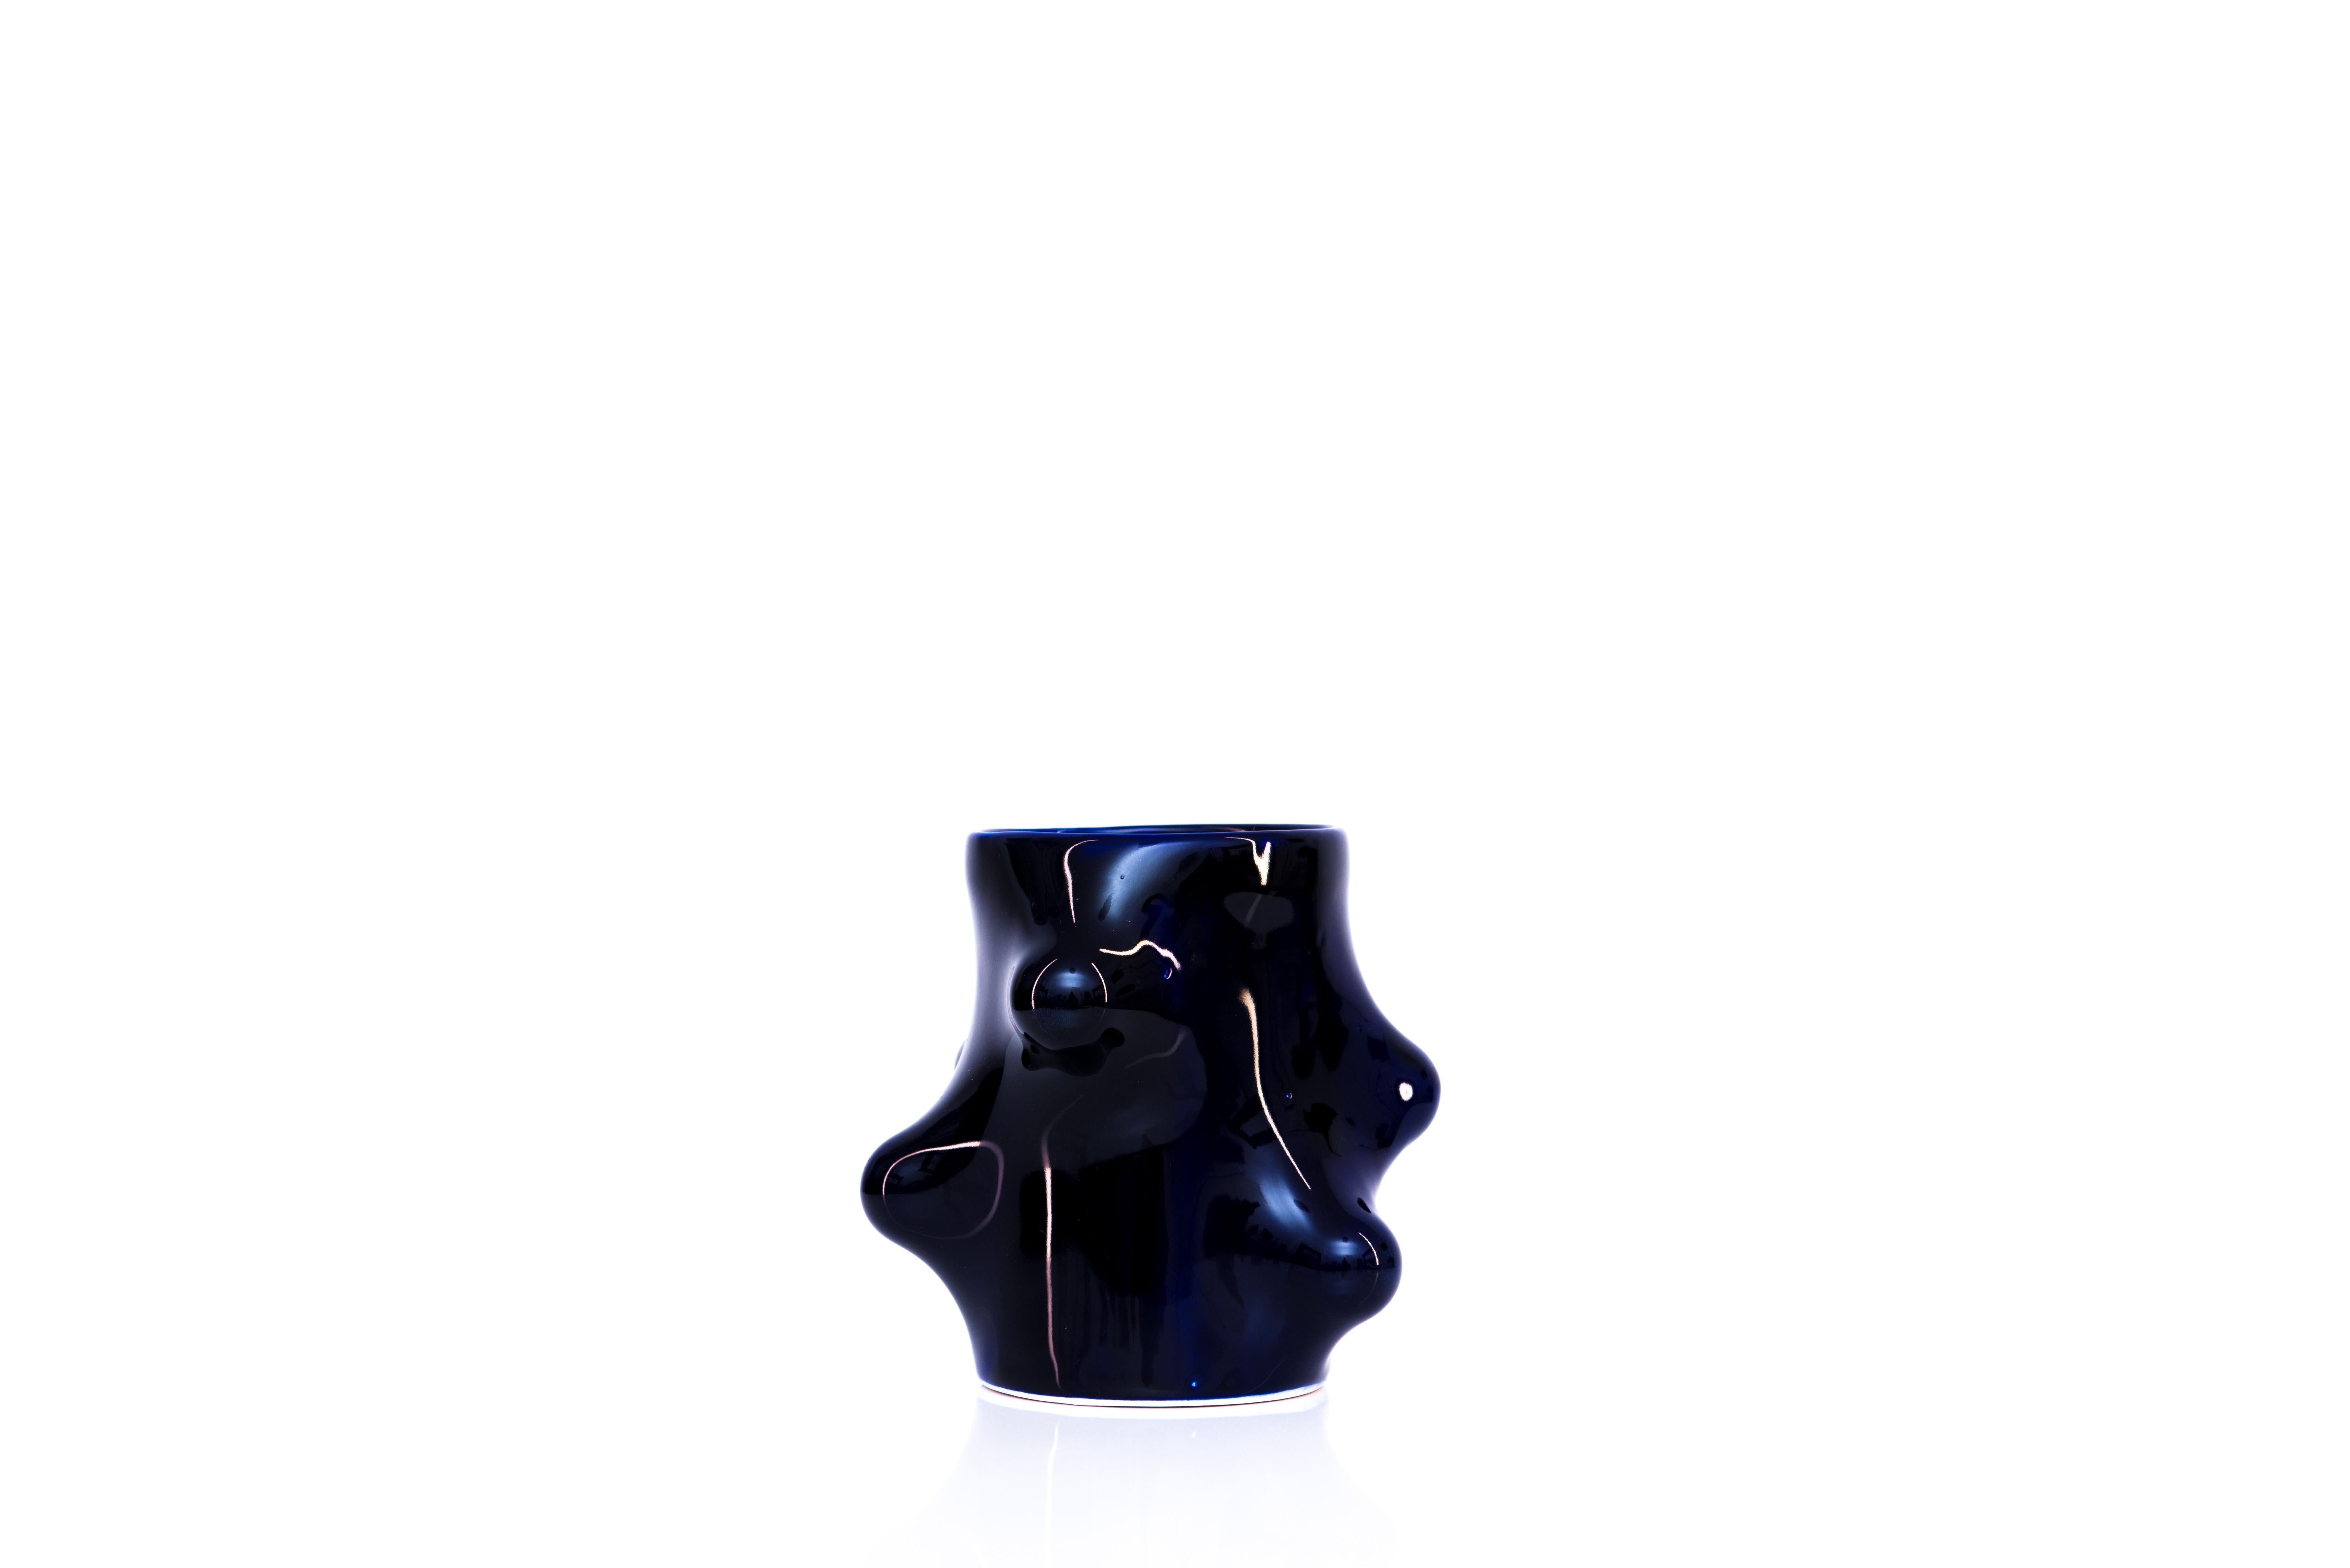 Bumps 2.0 cobalt blue cup by Arkadiusz Szwed
Dimensions: L 11 x W 11 x H 12 cm
Materials: Porcelain

Arkadiusz Szwed designs and produce ceramic products.
He lives in Warsaw / Poland and work at the School of Form as an Instructor and Head of